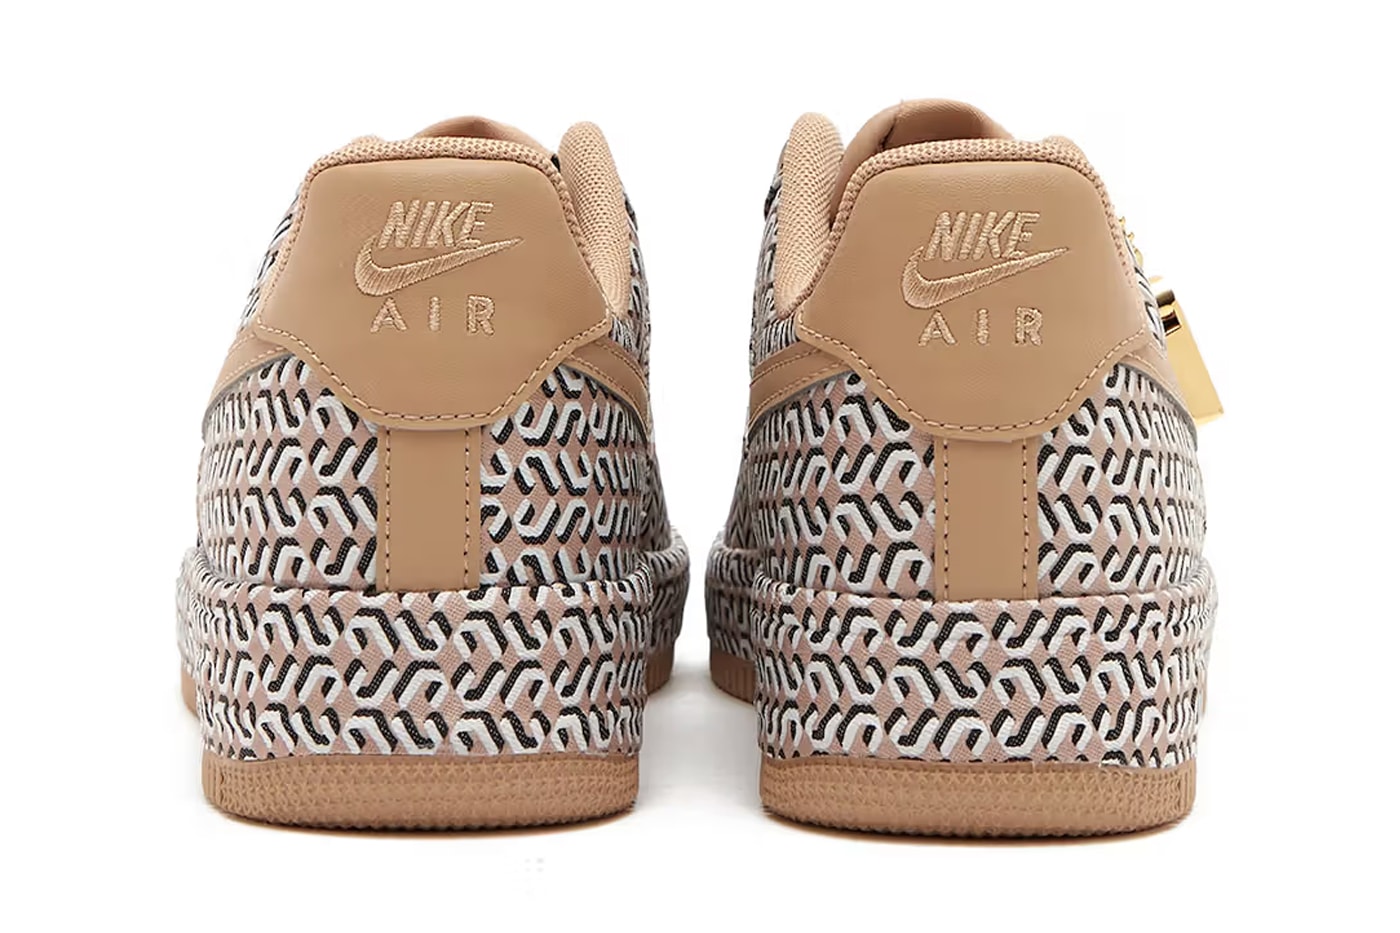 Nike Air Force 1 Low United in Victory release Info